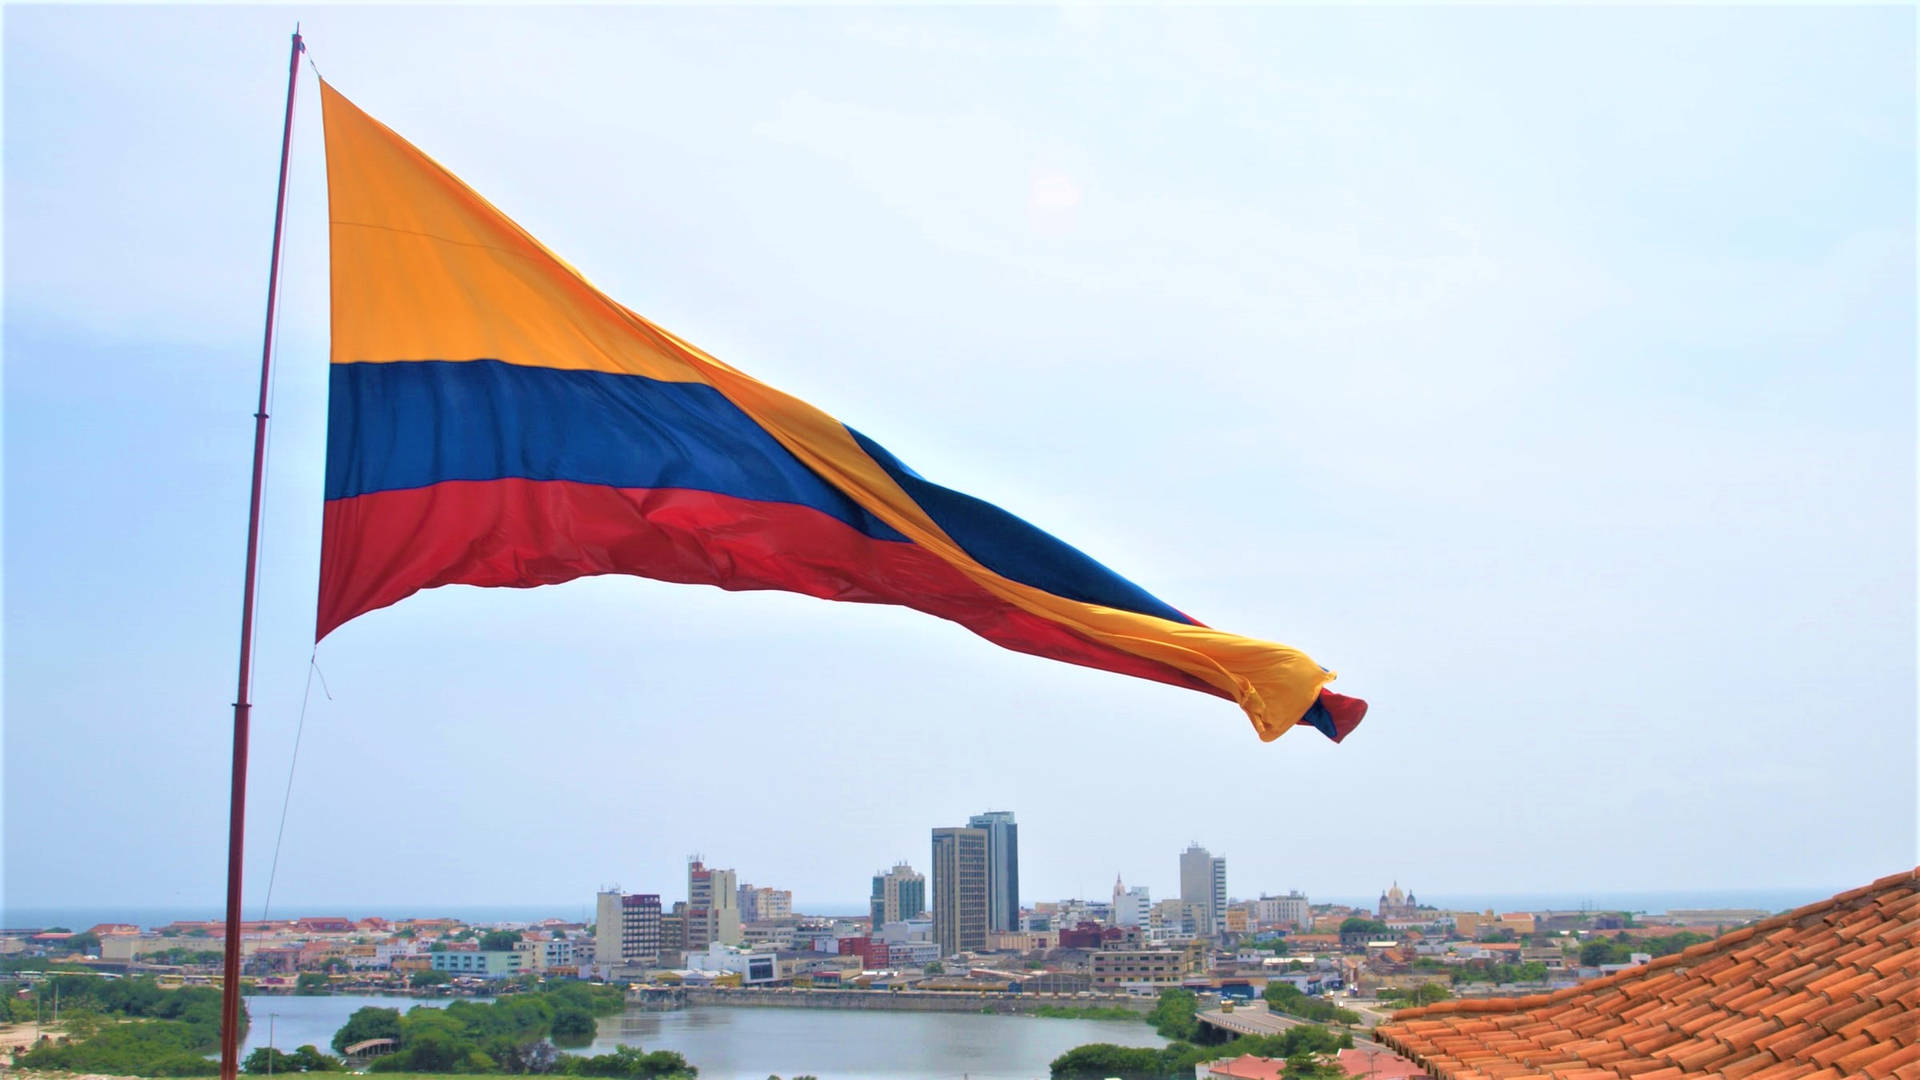 Caption: Vibrant Colombian Flag Waving Proudly Over A Bustling Cityscape. Background